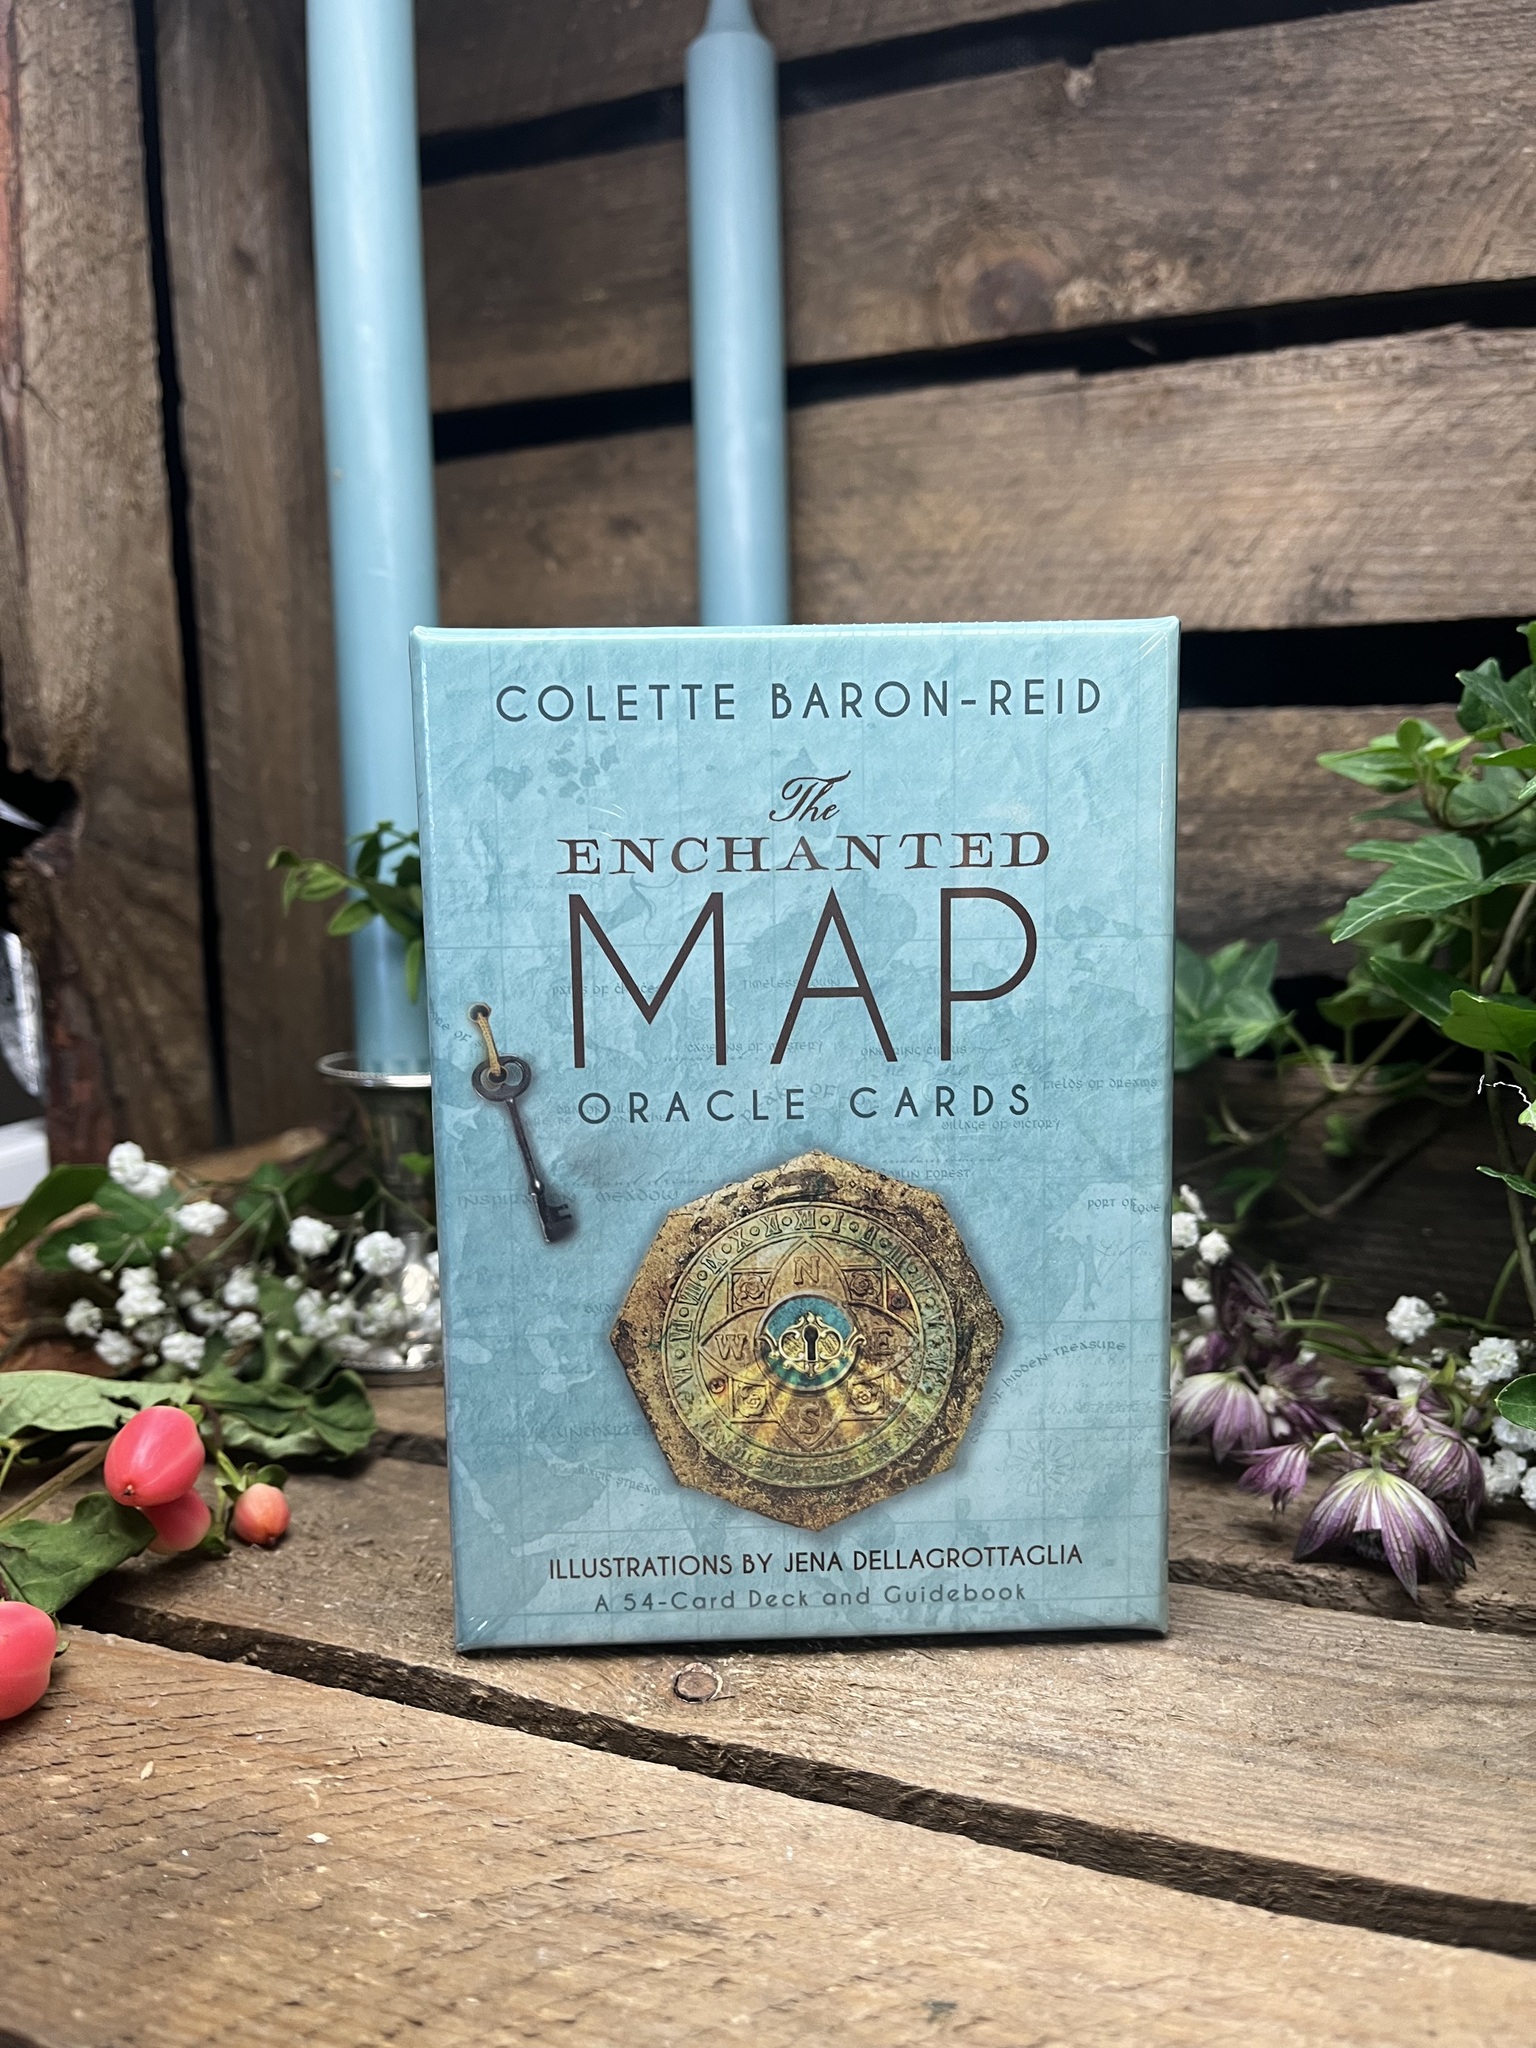 The enchanted map oracle cards